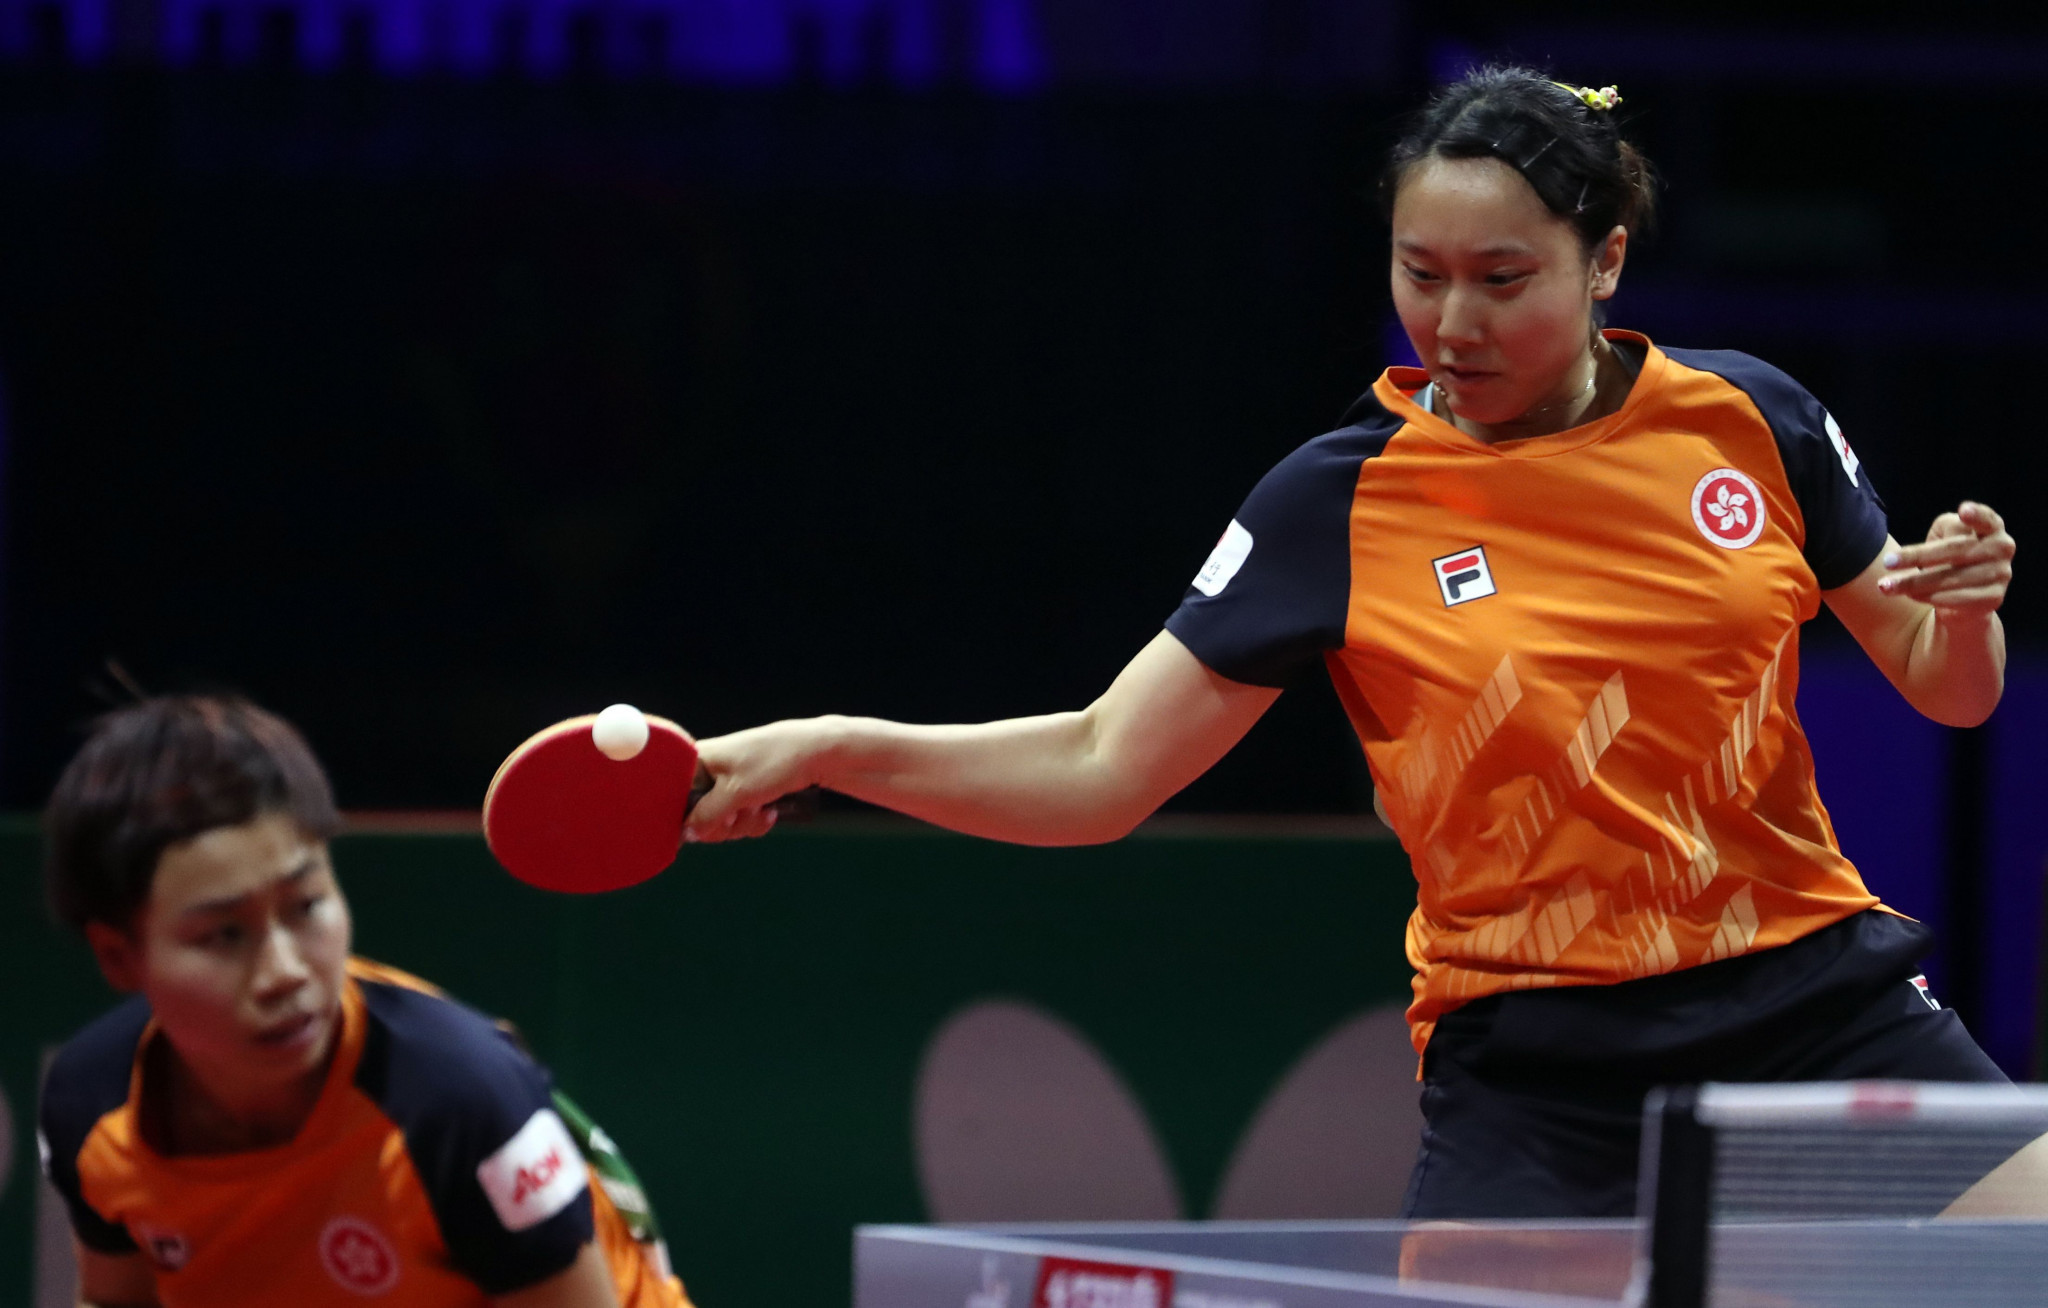 Hong Kong has the maximum of six Olympic quota spots in table tennis ©Getty Images